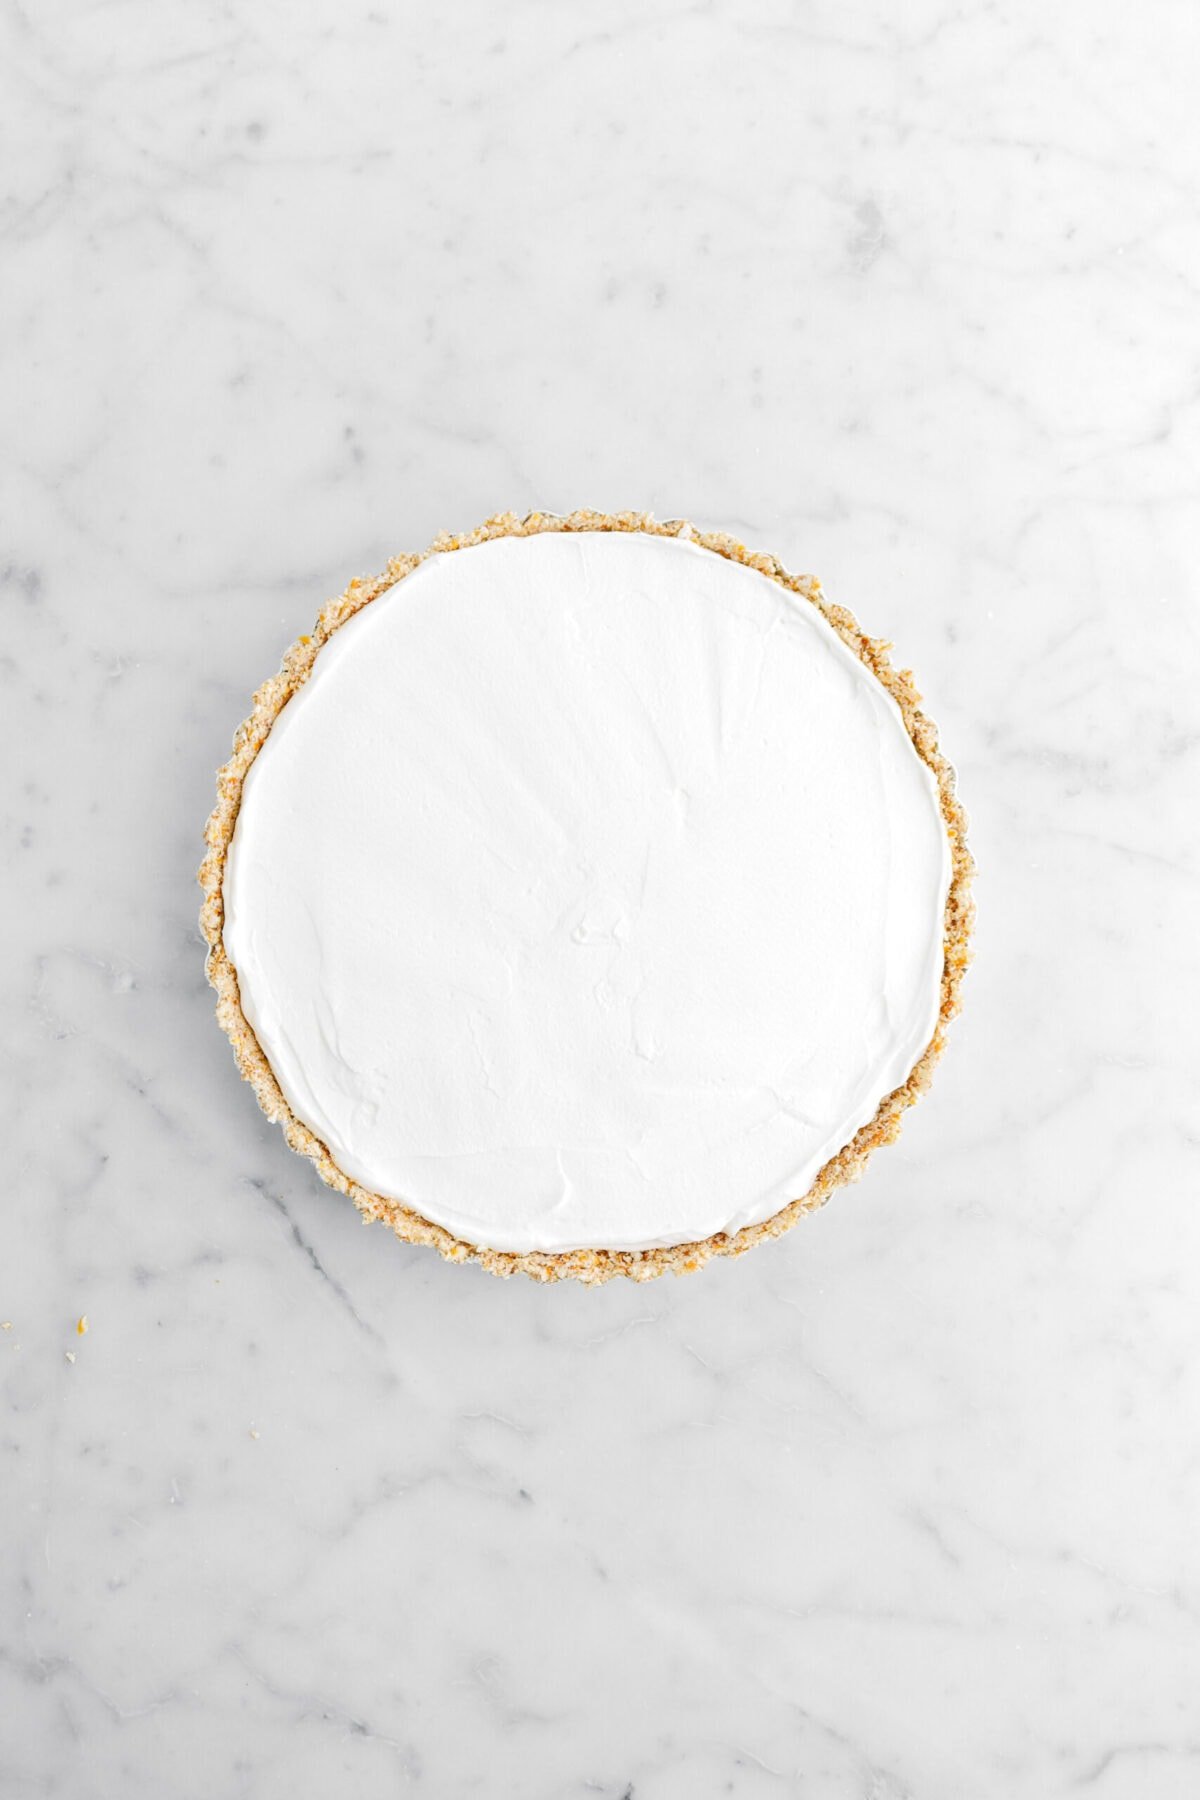 whipped cream spread evenly in tart crust.